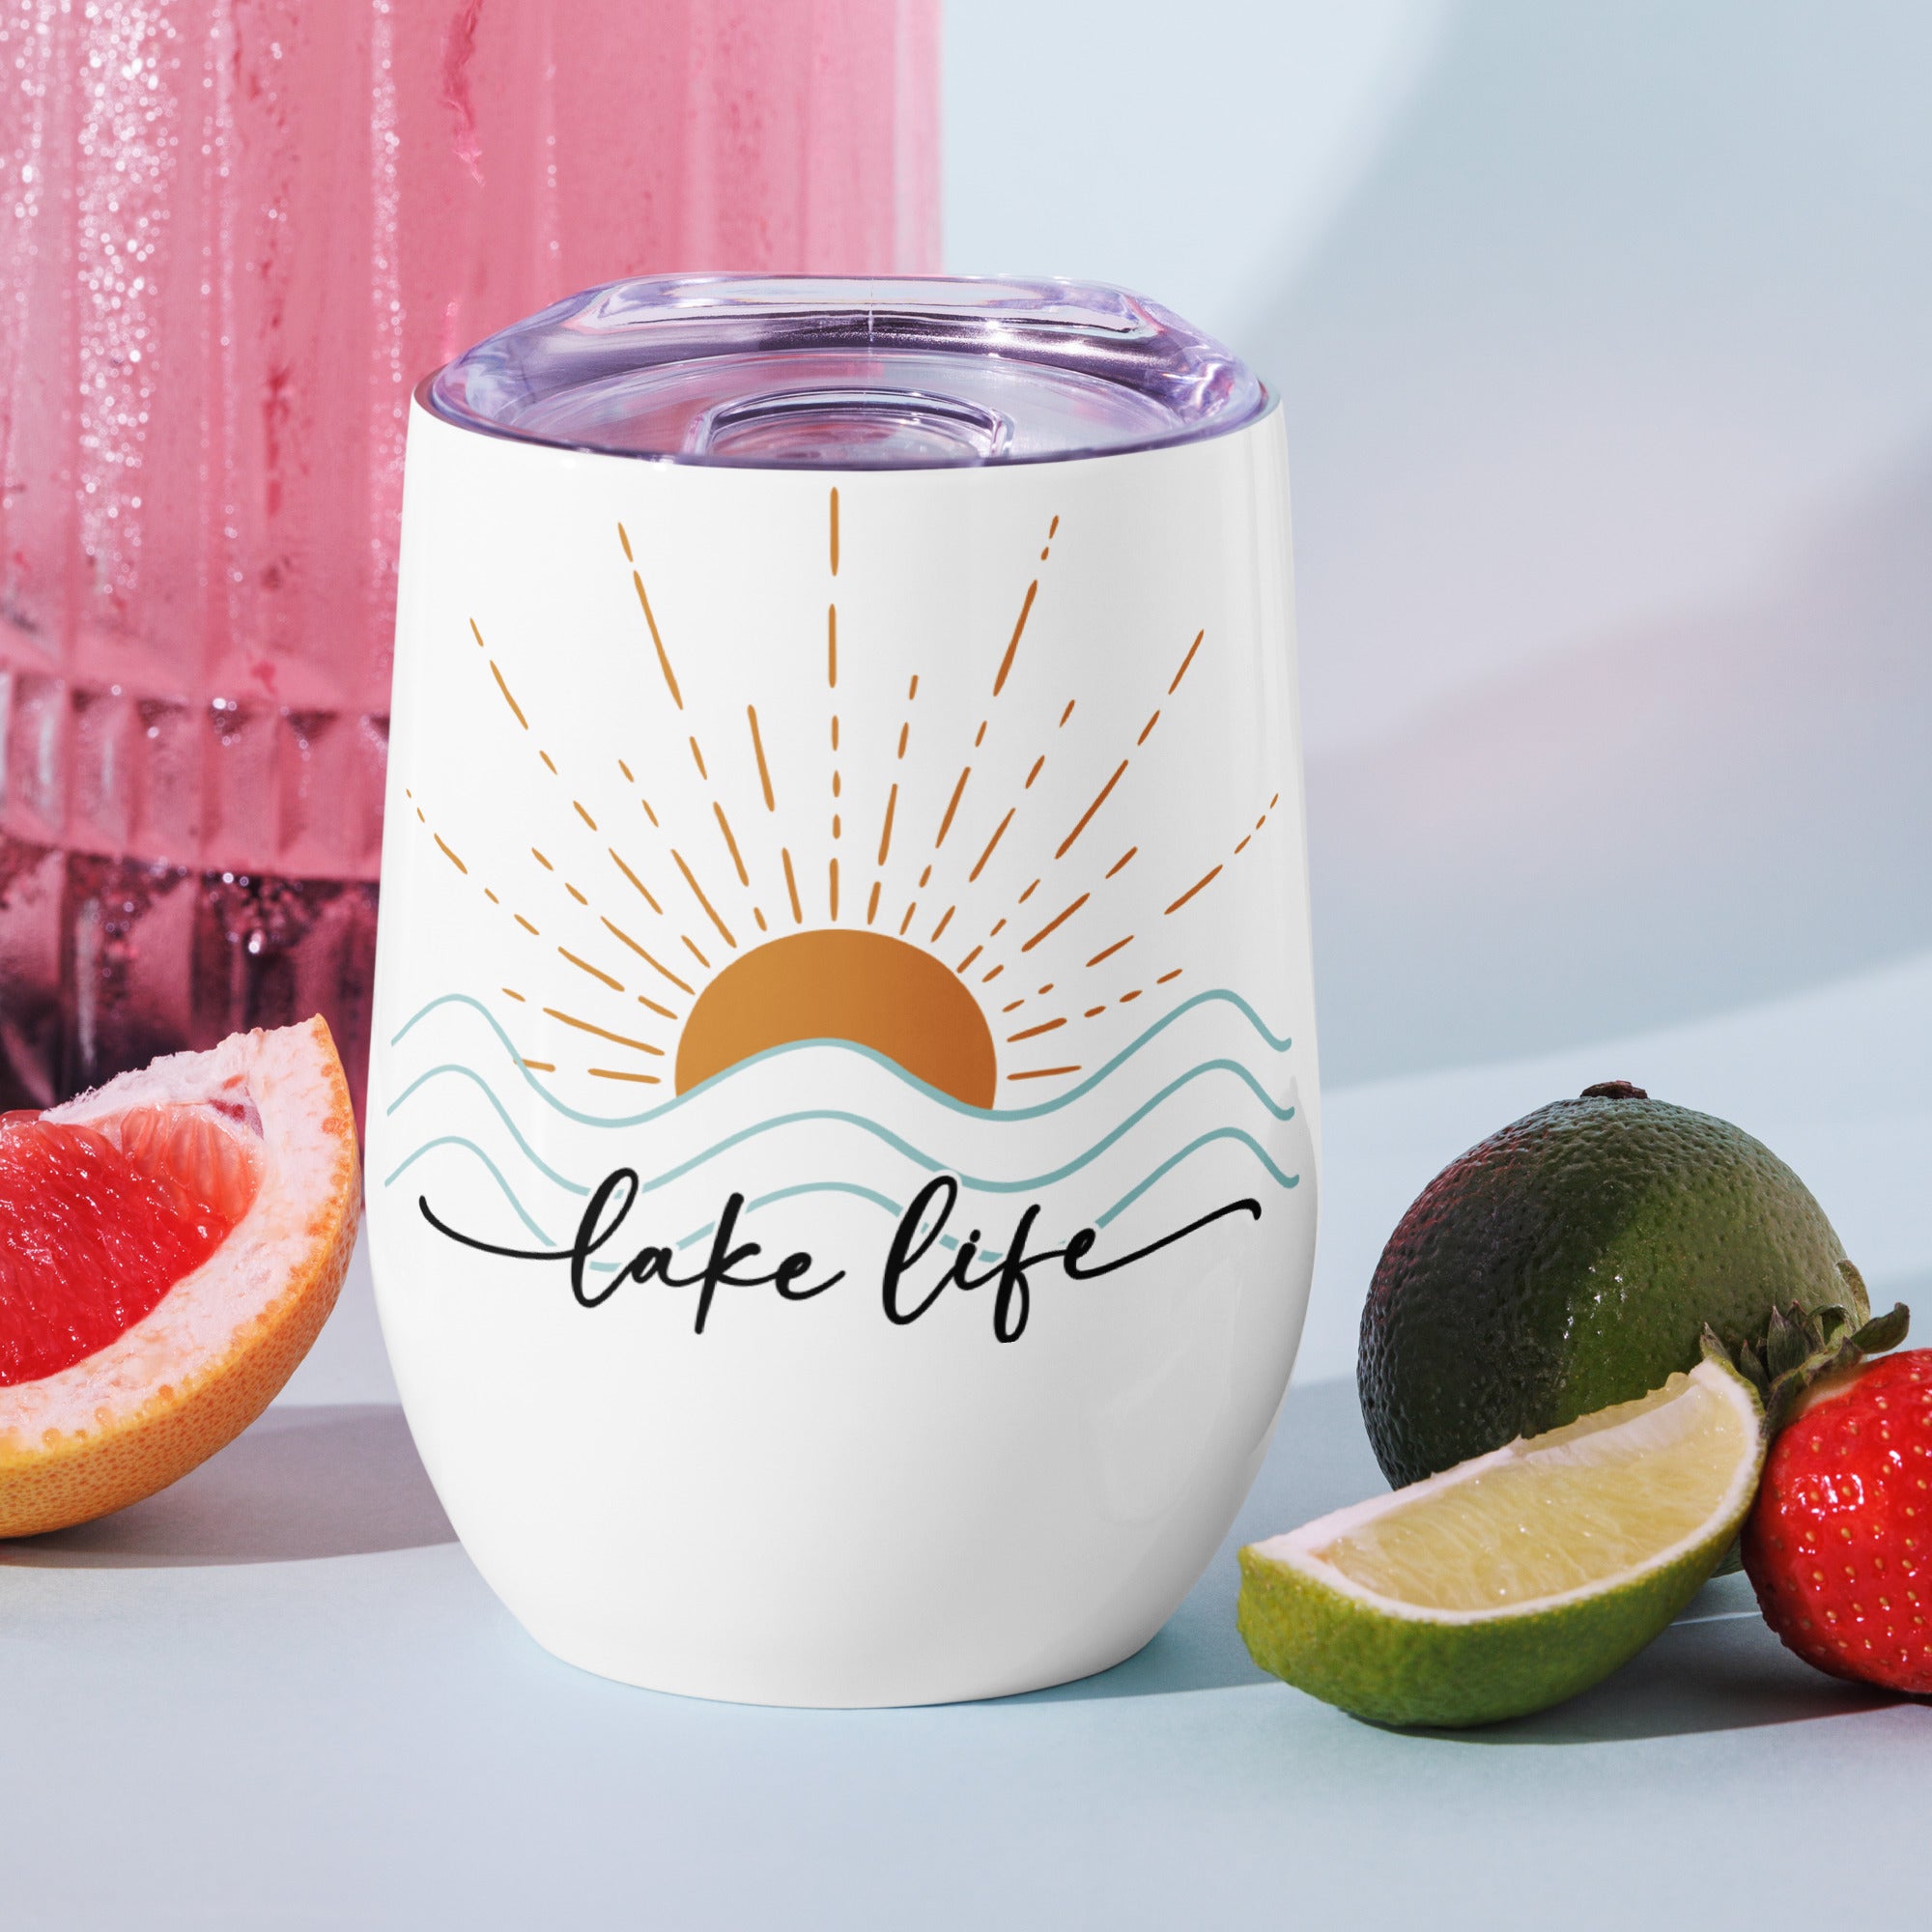 Life is Better at the Lake: "Lake Life" Stainless Steel Wine Tumbler